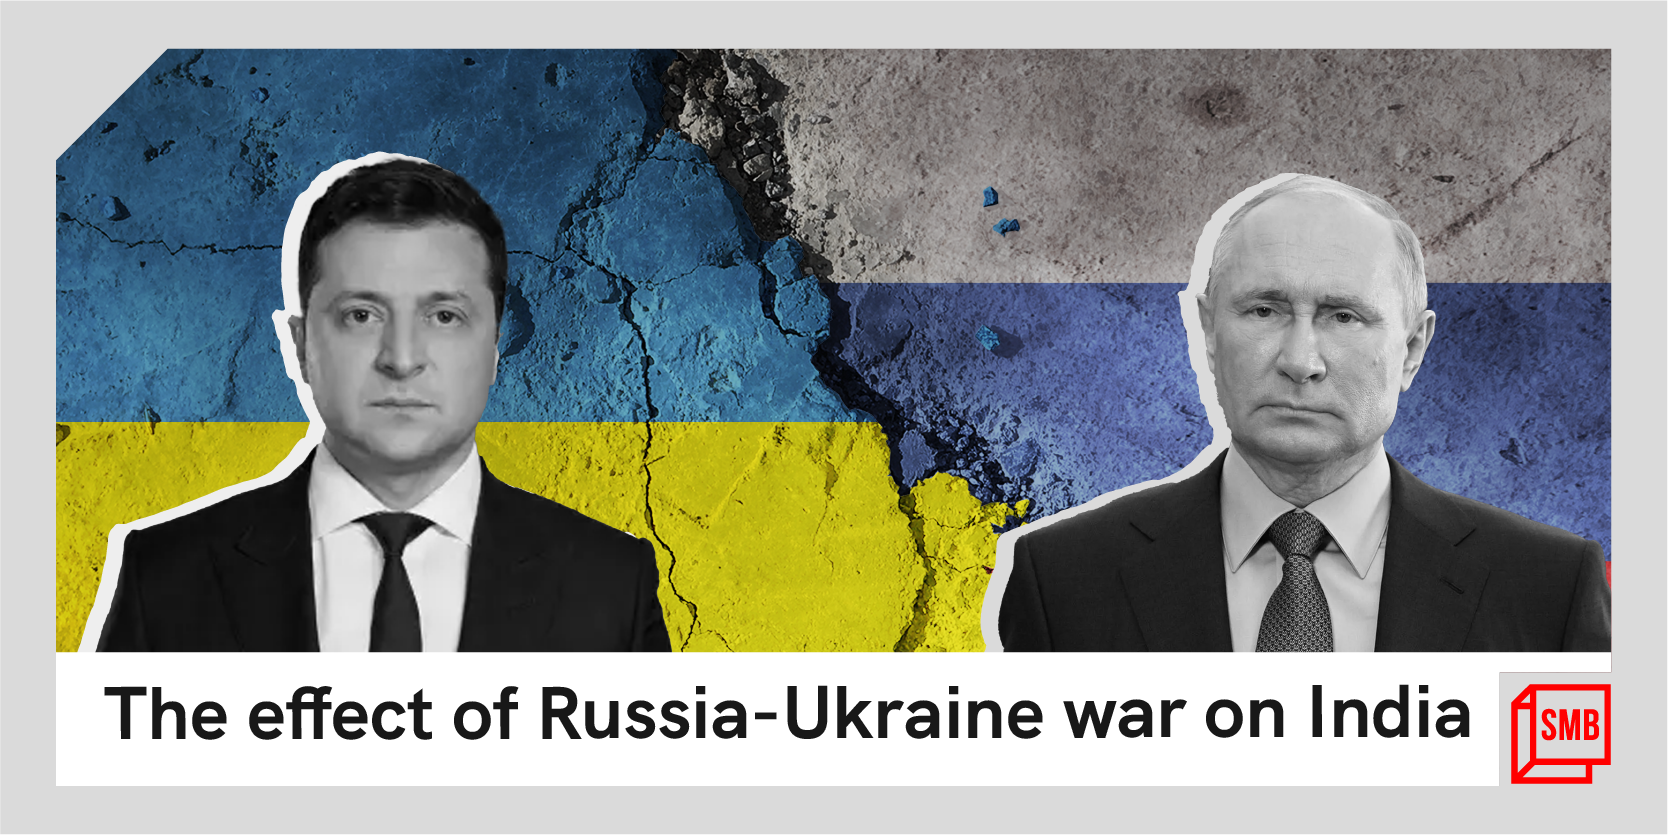 The effect of Russia-Ukraine conflict on India's small businesses